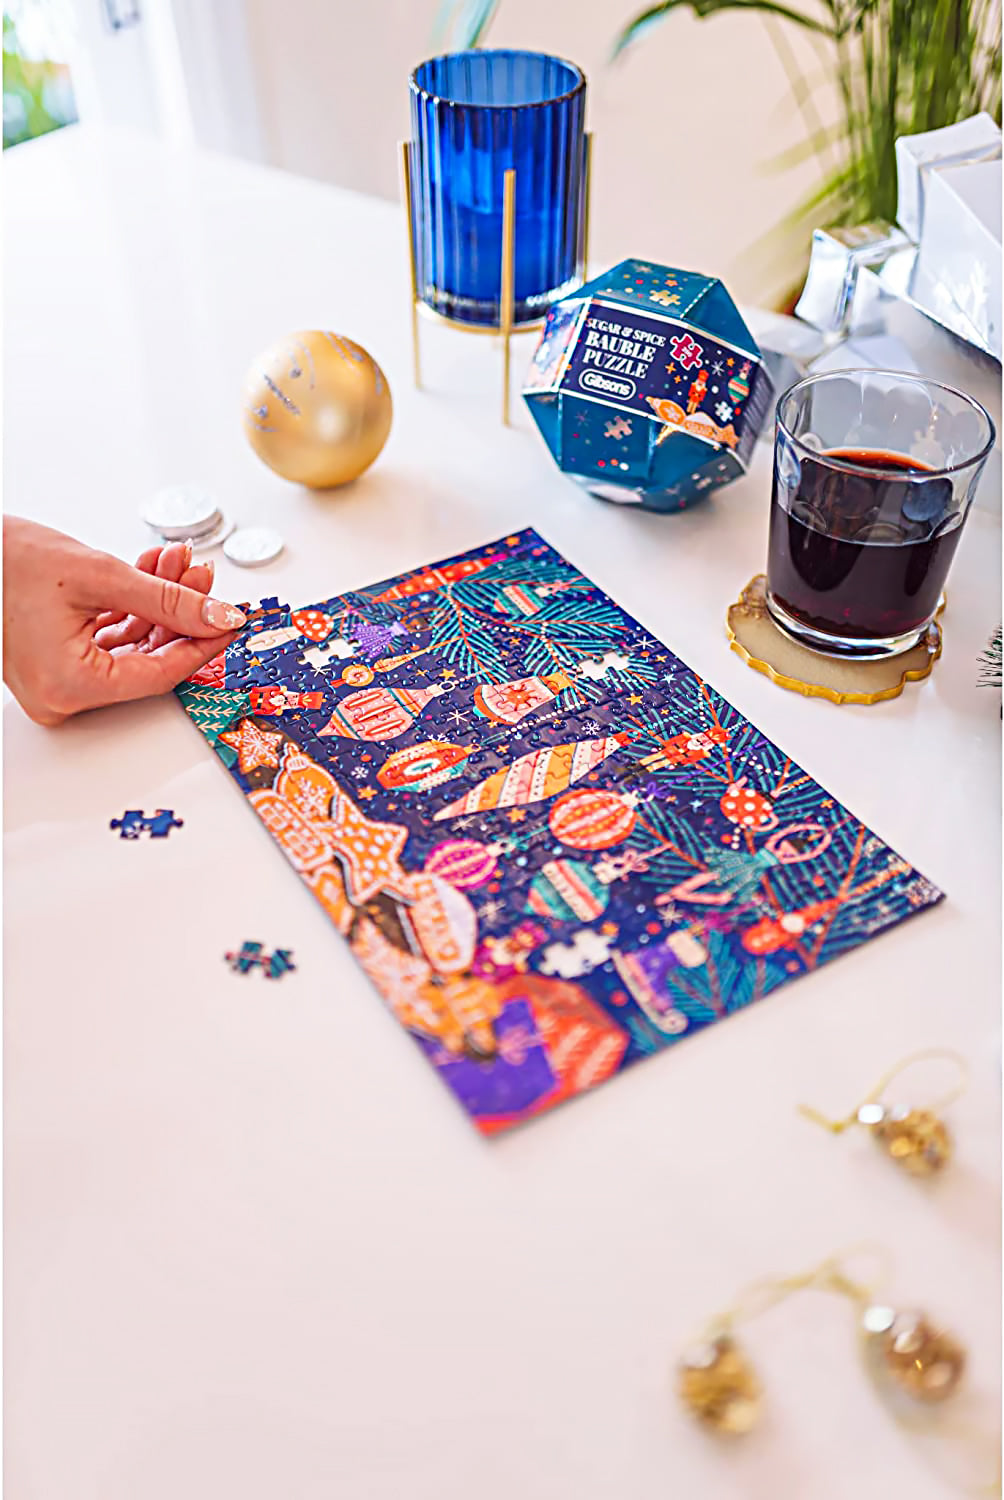 Who knew a jigsaw puzzle could be the perfect Christmas tree decoration?